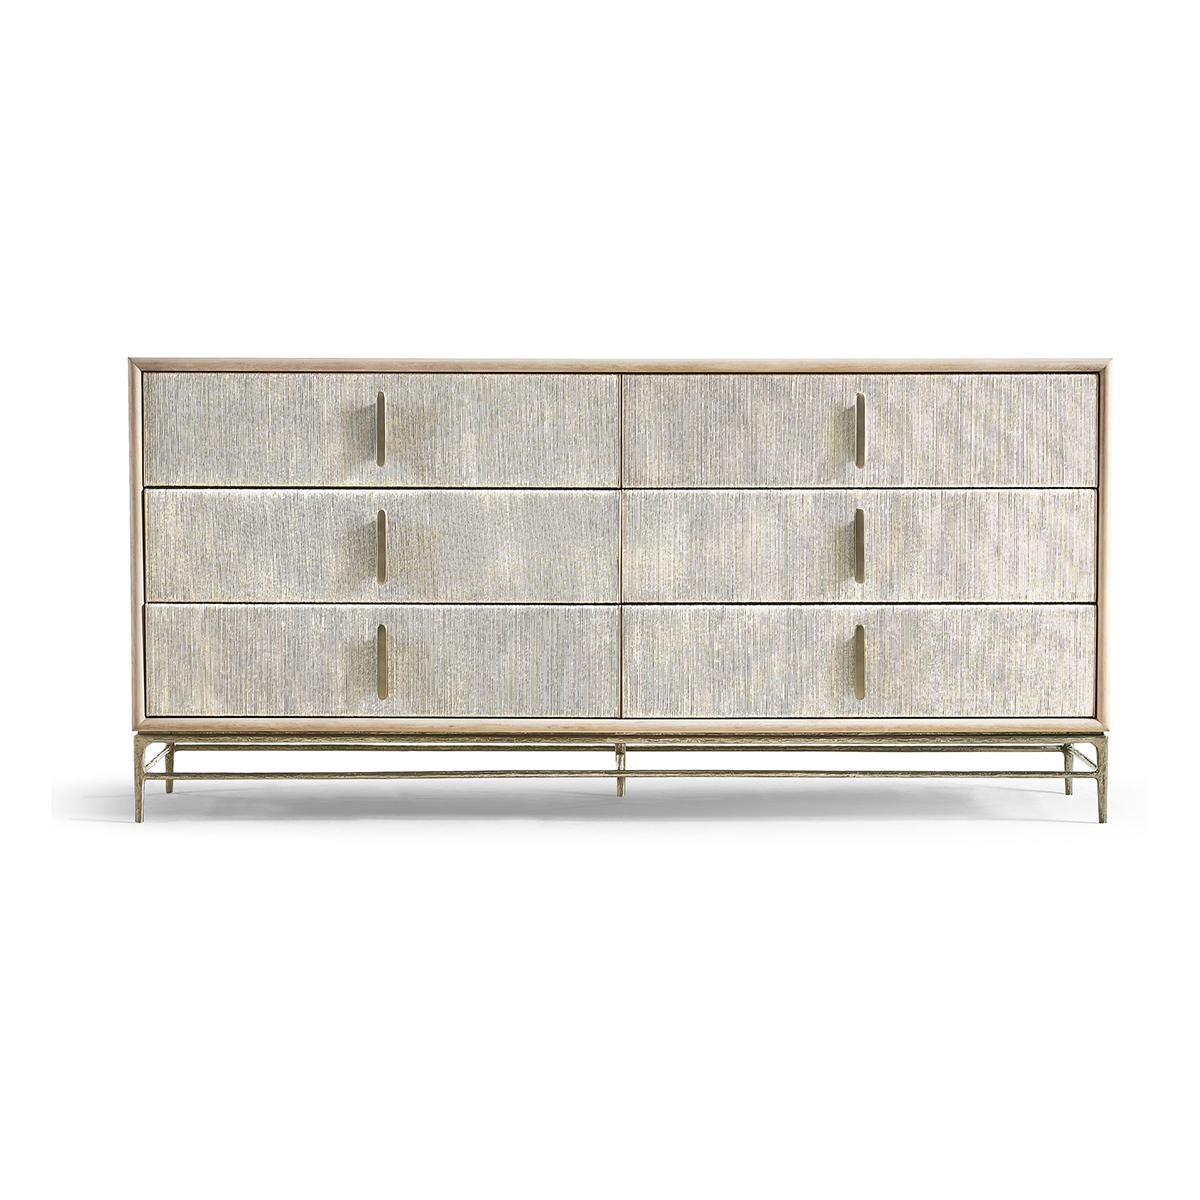 Modern Danish dresser, the stylish design, replete with six Danish cord-wrapped drawer fronts and bleached oak veneers adds style to the classic tone and feel of contemporary vision without shortcuts.

Cast stainless steel base and vertical